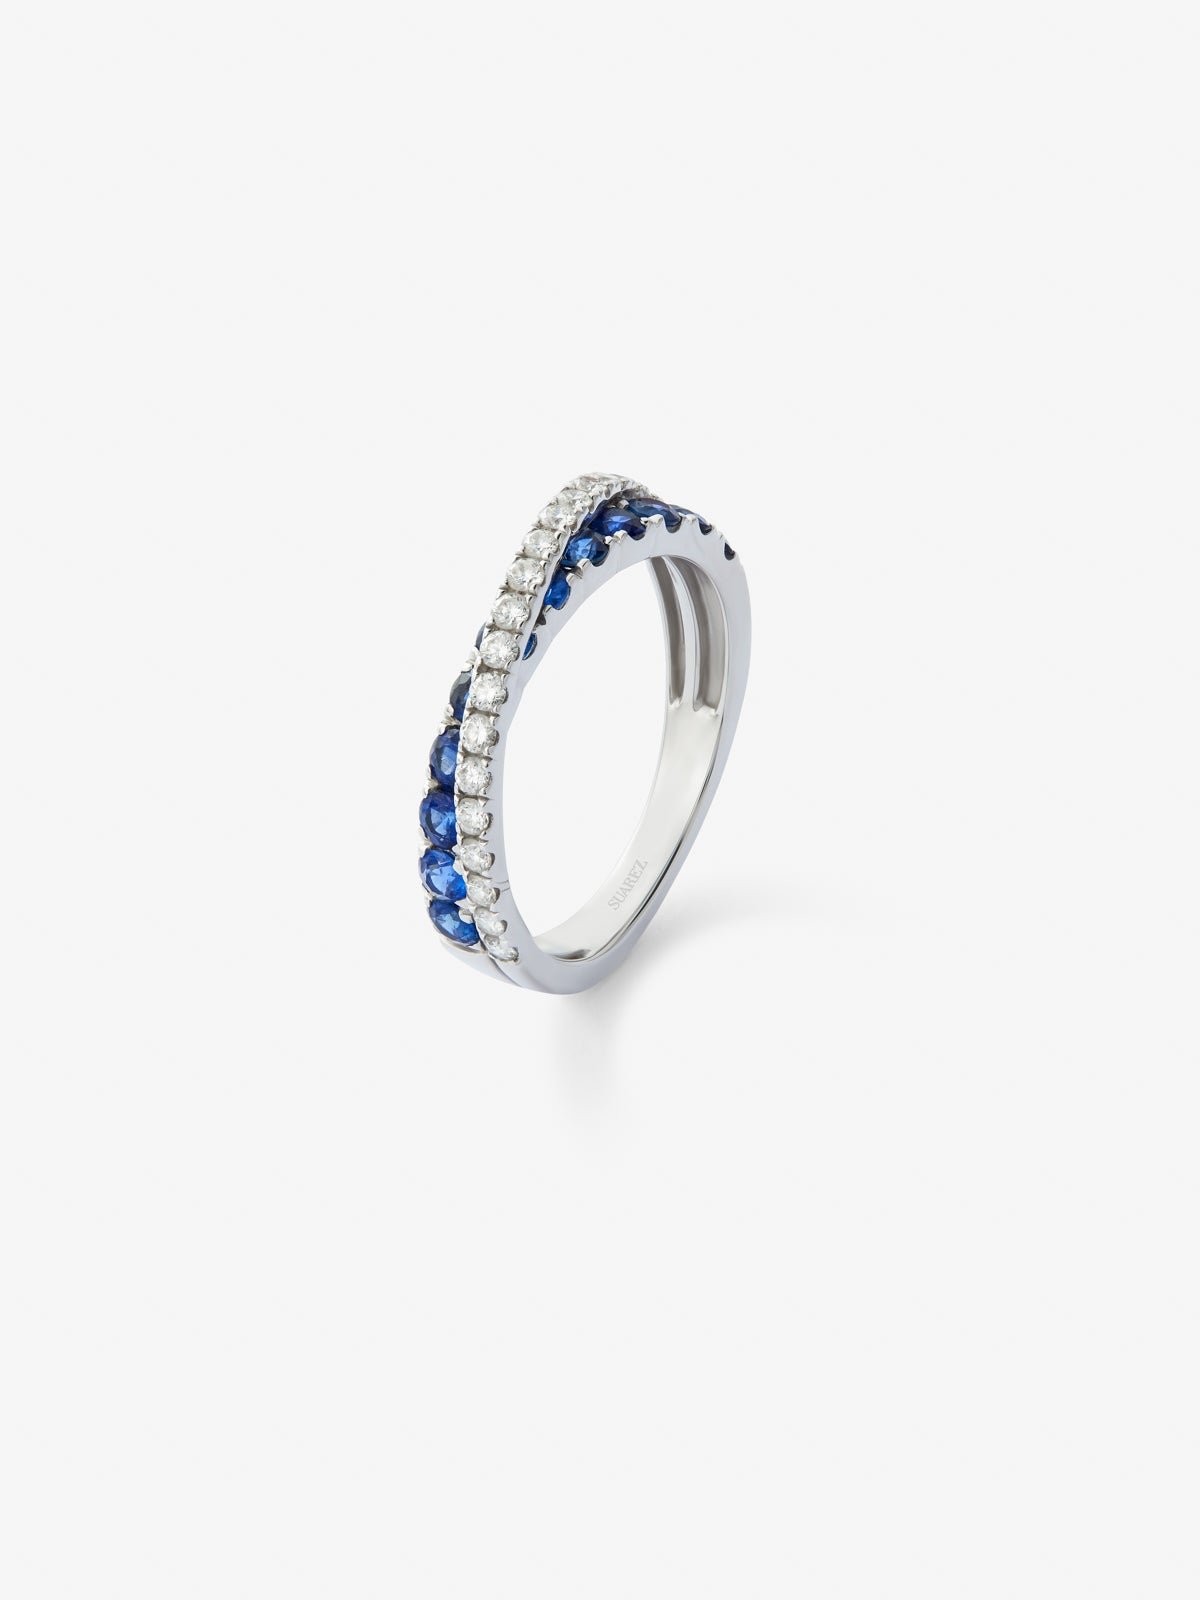 18K white gold cross ring with 12 brilliant-cut blue sapphires with a total of 0.77 cts and 20 brilliant-cut diamonds with a total of 0.29 cts